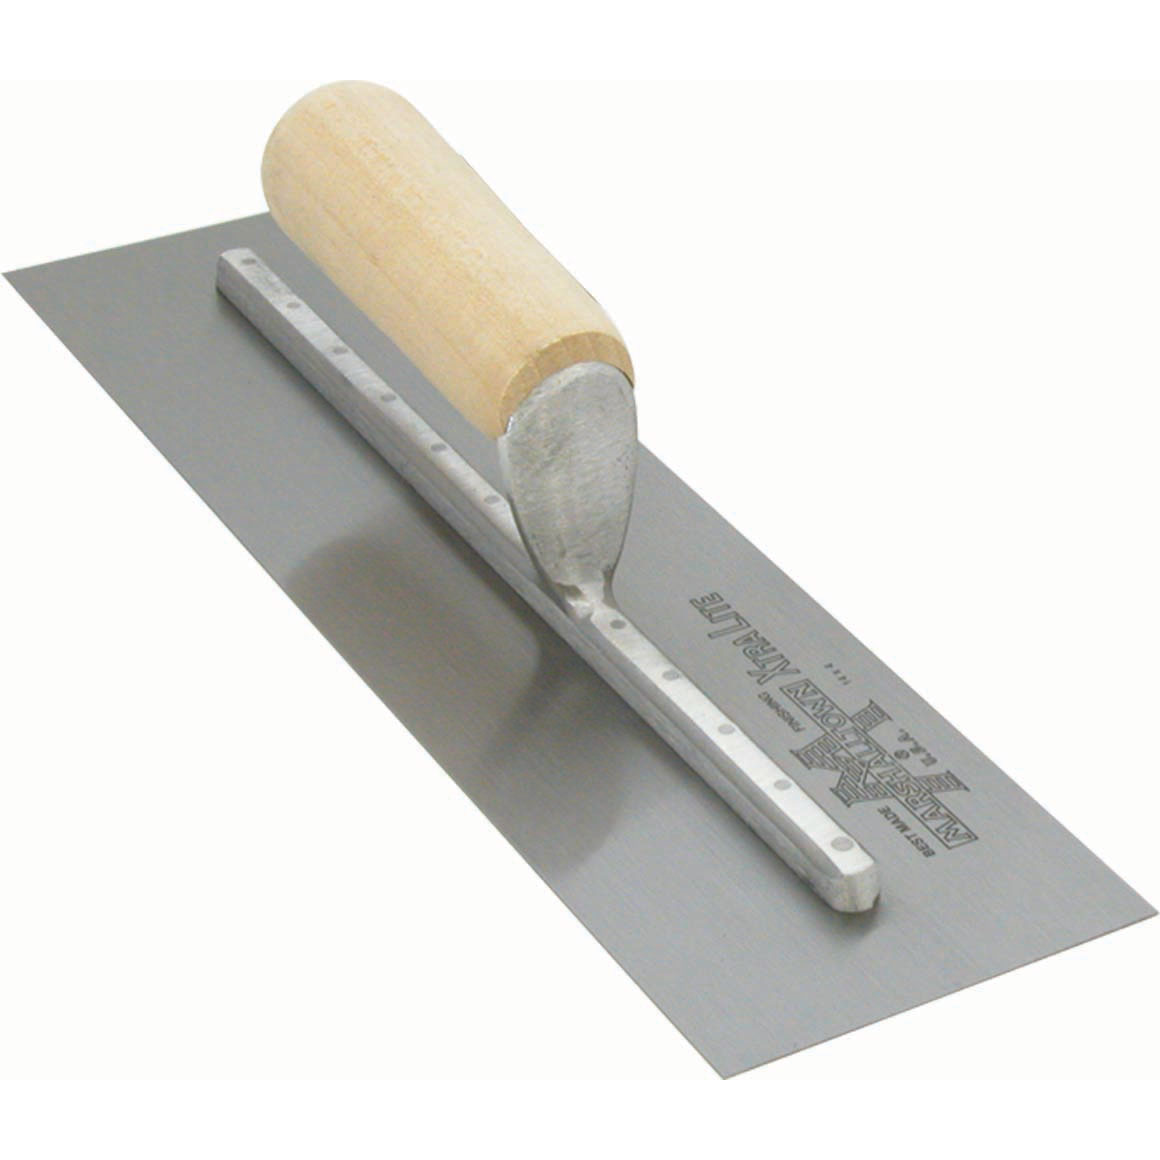 Marshalltown MX205 20in x 5in Finishing Trowel with Straight Wood Handle MX205